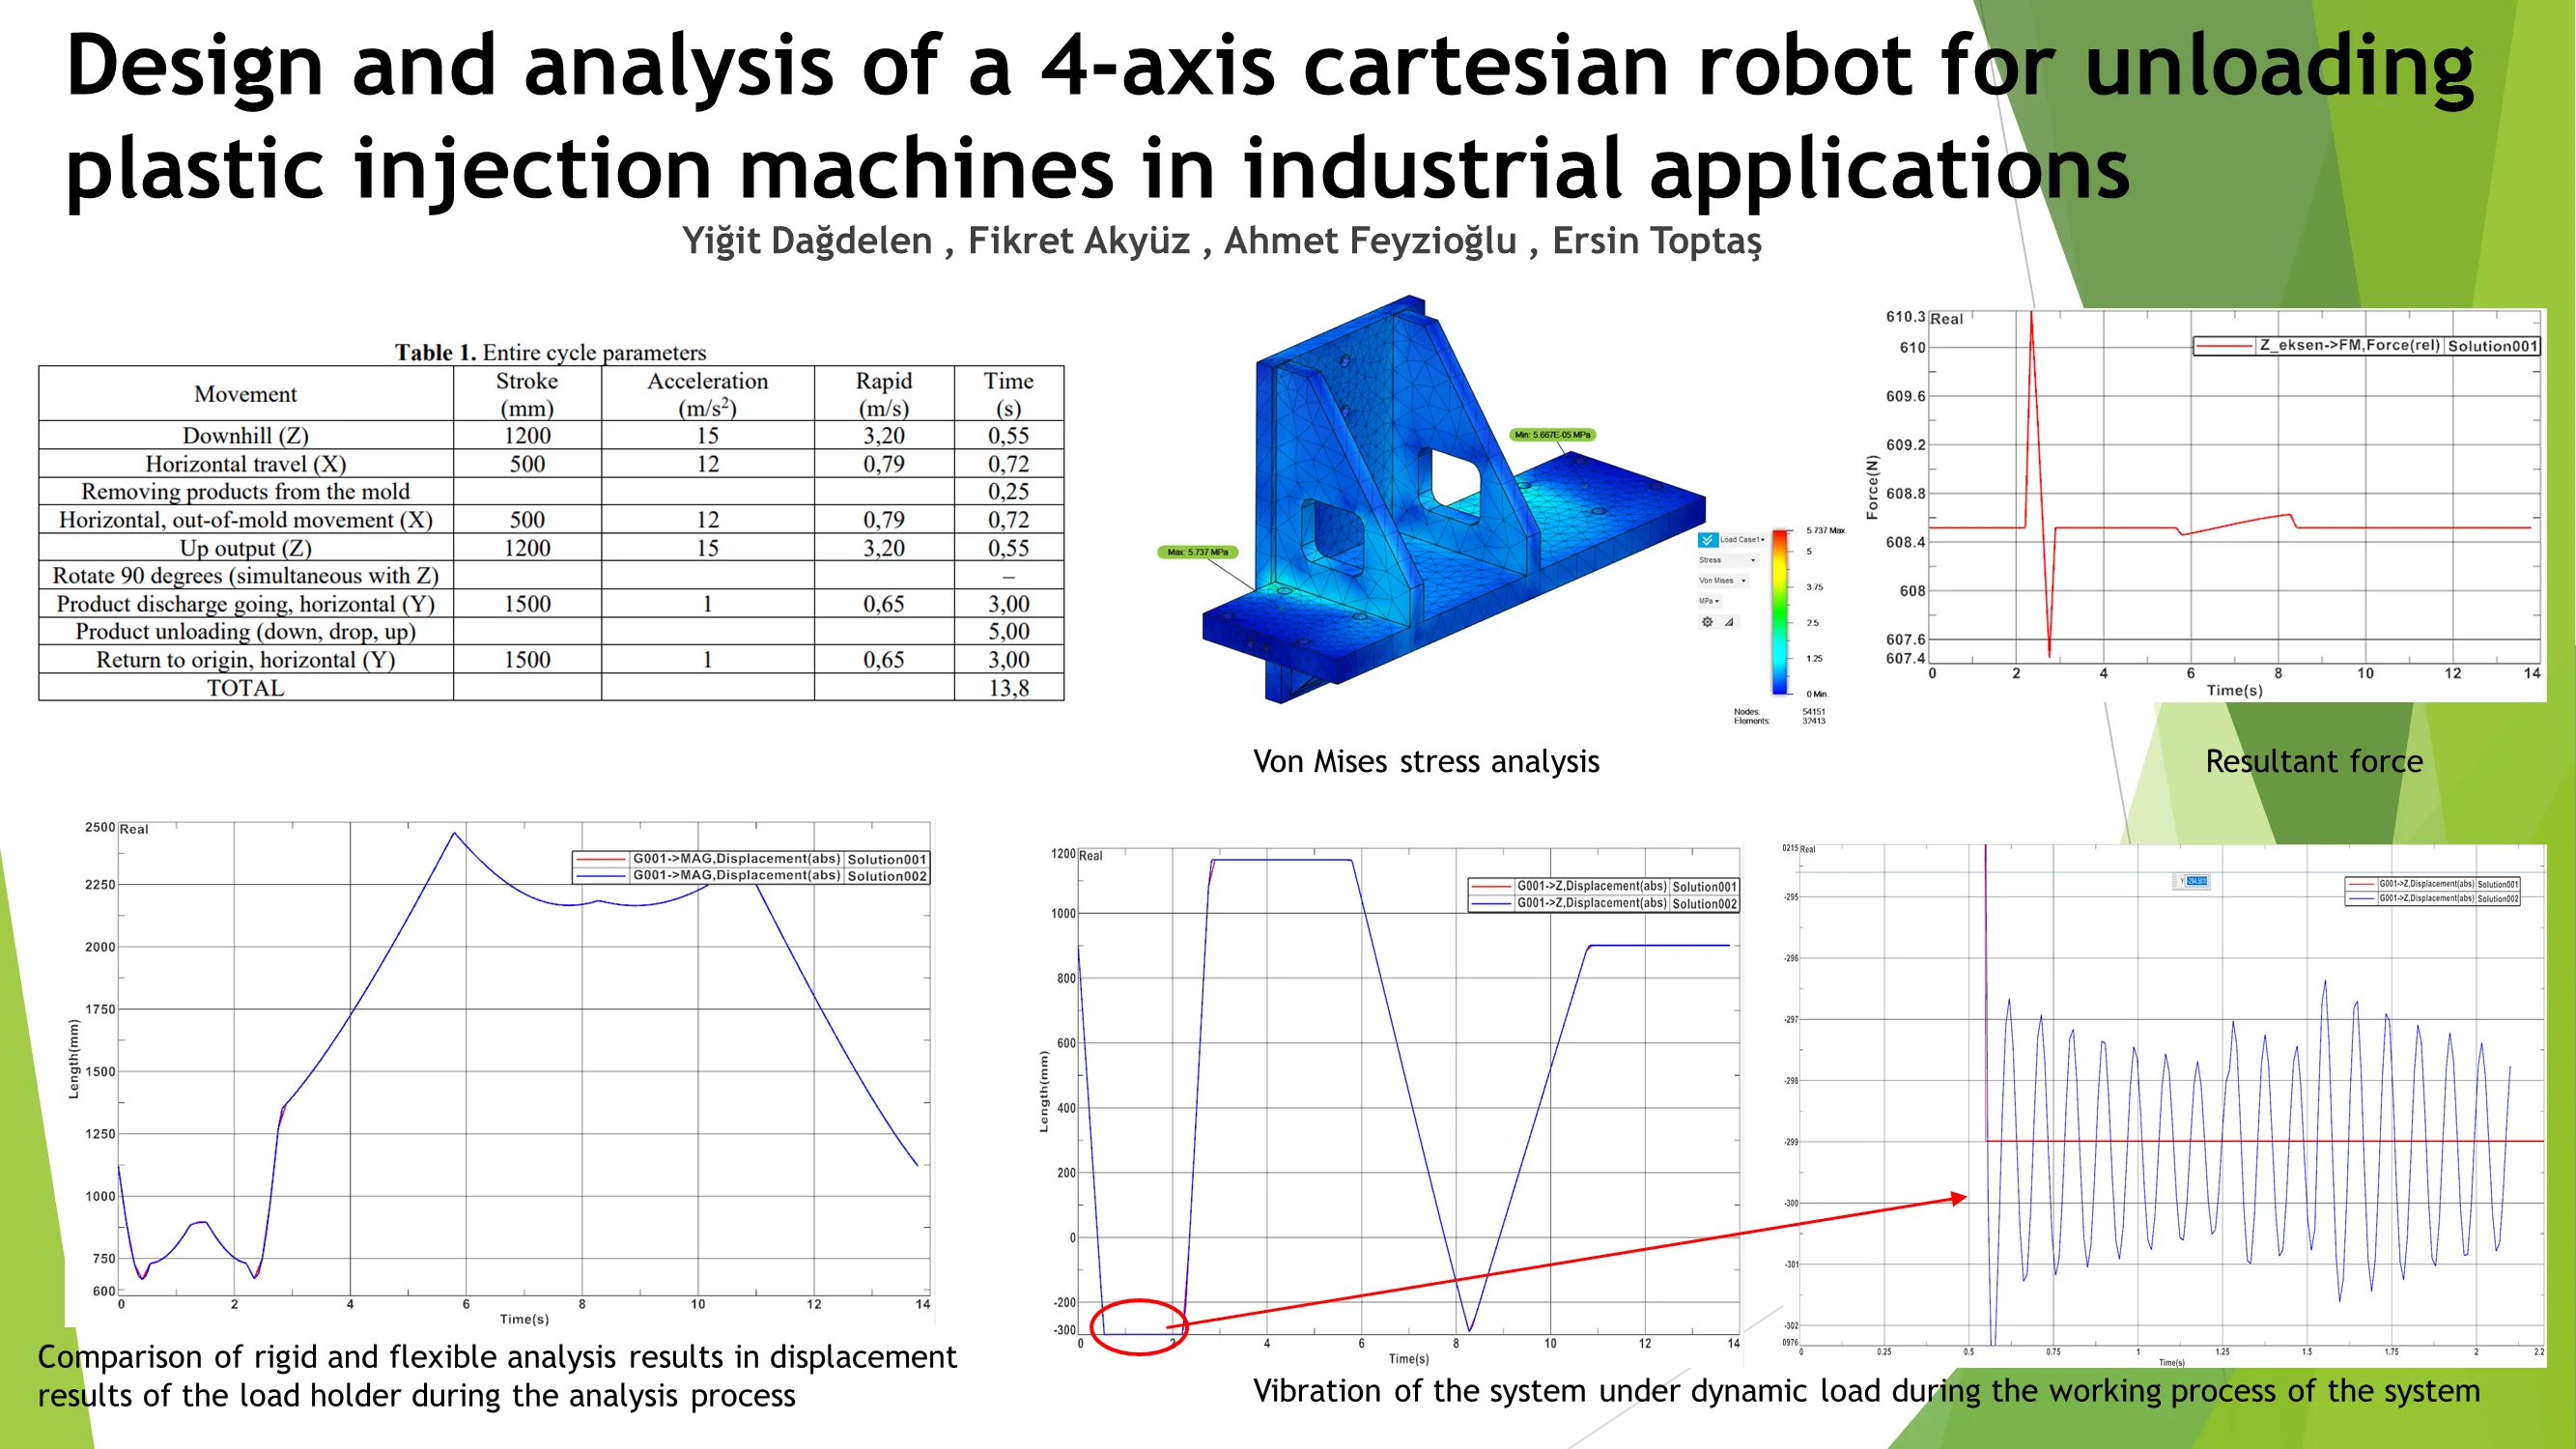 Design and analysis of a 4-axis cartesian robot for unloading plastic injection machines in industrial applications